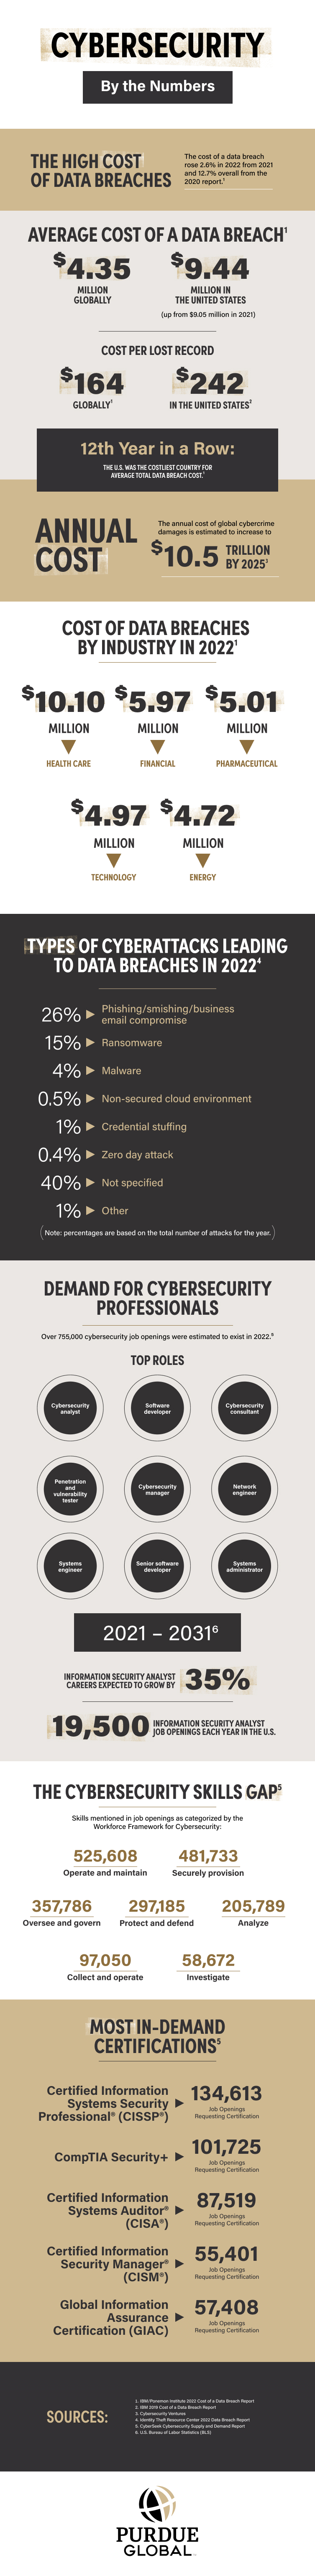 Cybersecurity by the Numbers Infographic